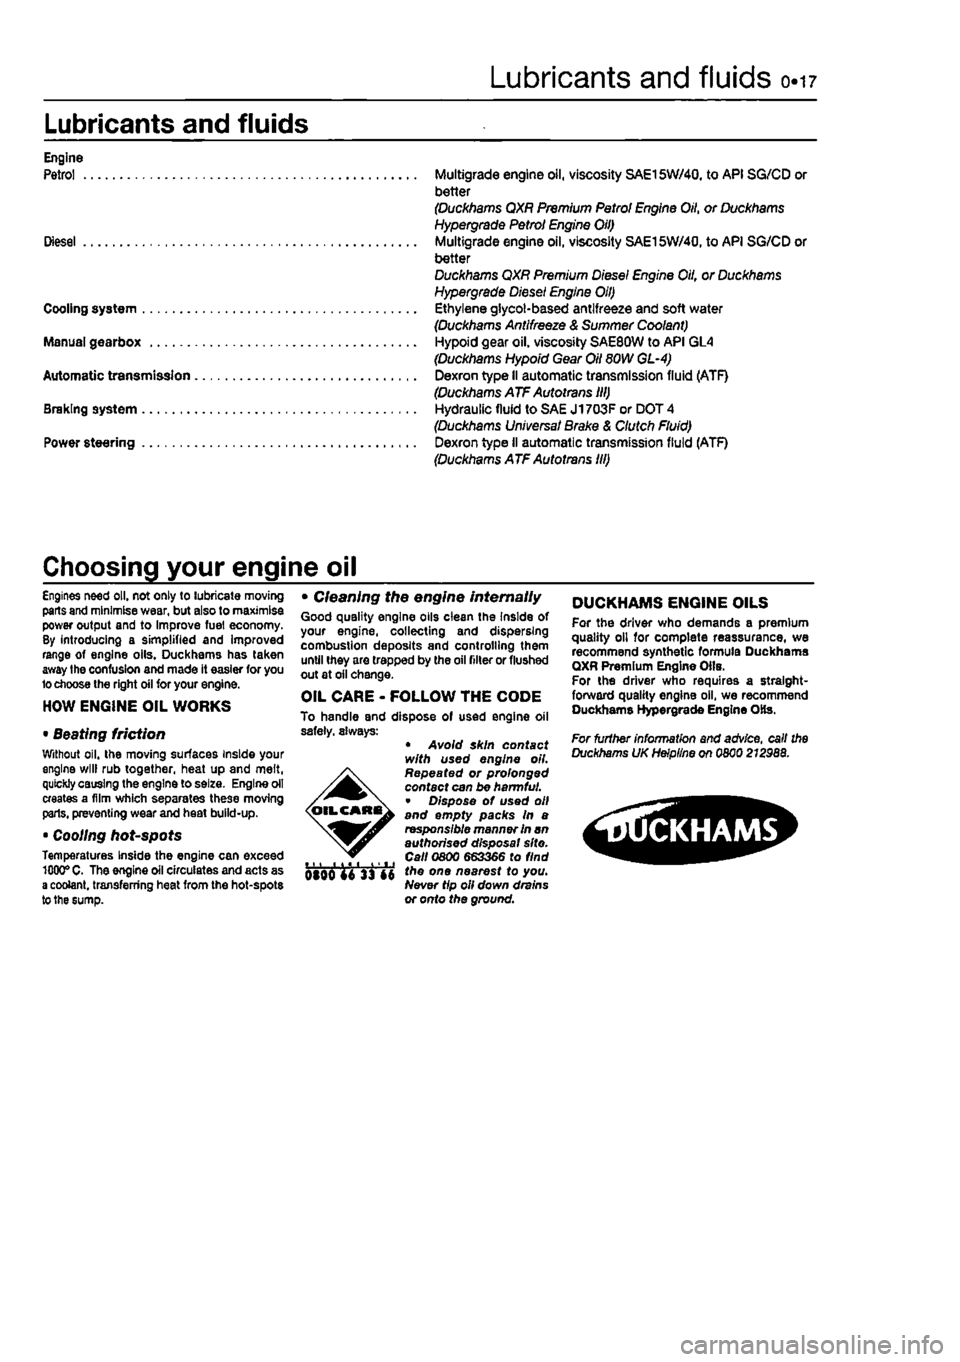 FIAT PUNTO 1996 176 / 1.G User Guide 
Lubricants and fluids 0.17 
Lubricants and fluids 
Engine Petrol Multigrade engine oil, viscosity SAE15W/40, to API SG/CD or better (Duckhams QXR Premium Petrol Engine Oil, or Duckhams Hypergrade Pet